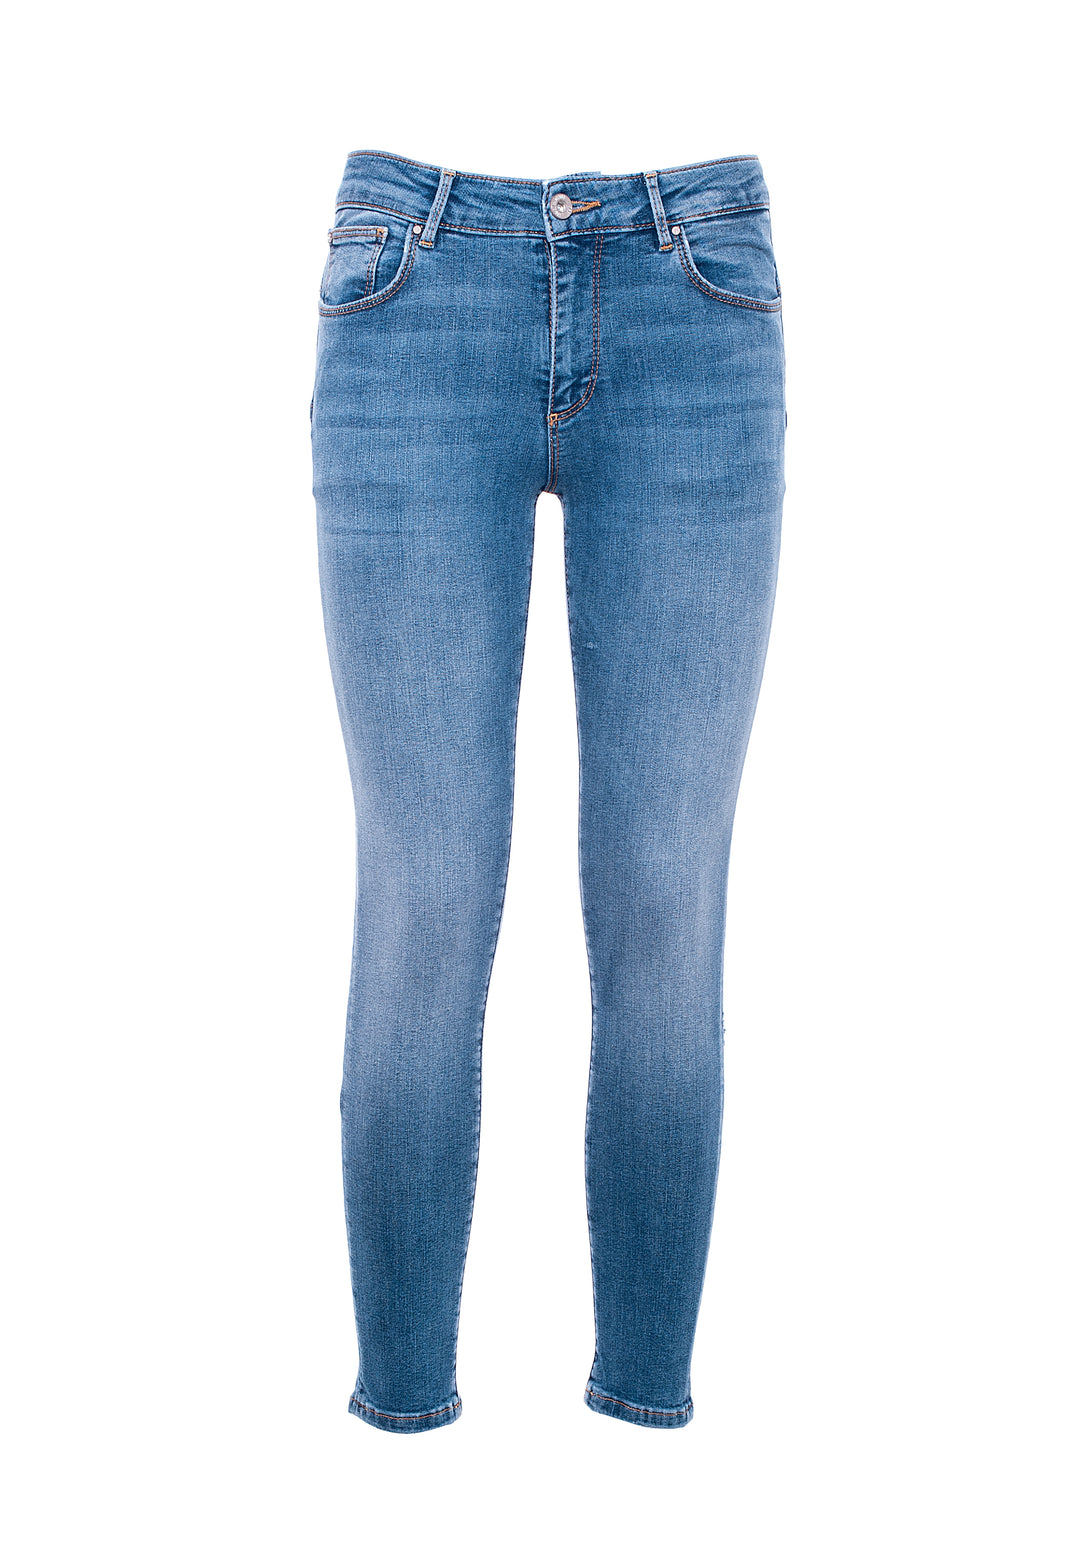 Jeans skinny fit made in stretch denim with middle wash Fracomina FP21SP5011D40702-258